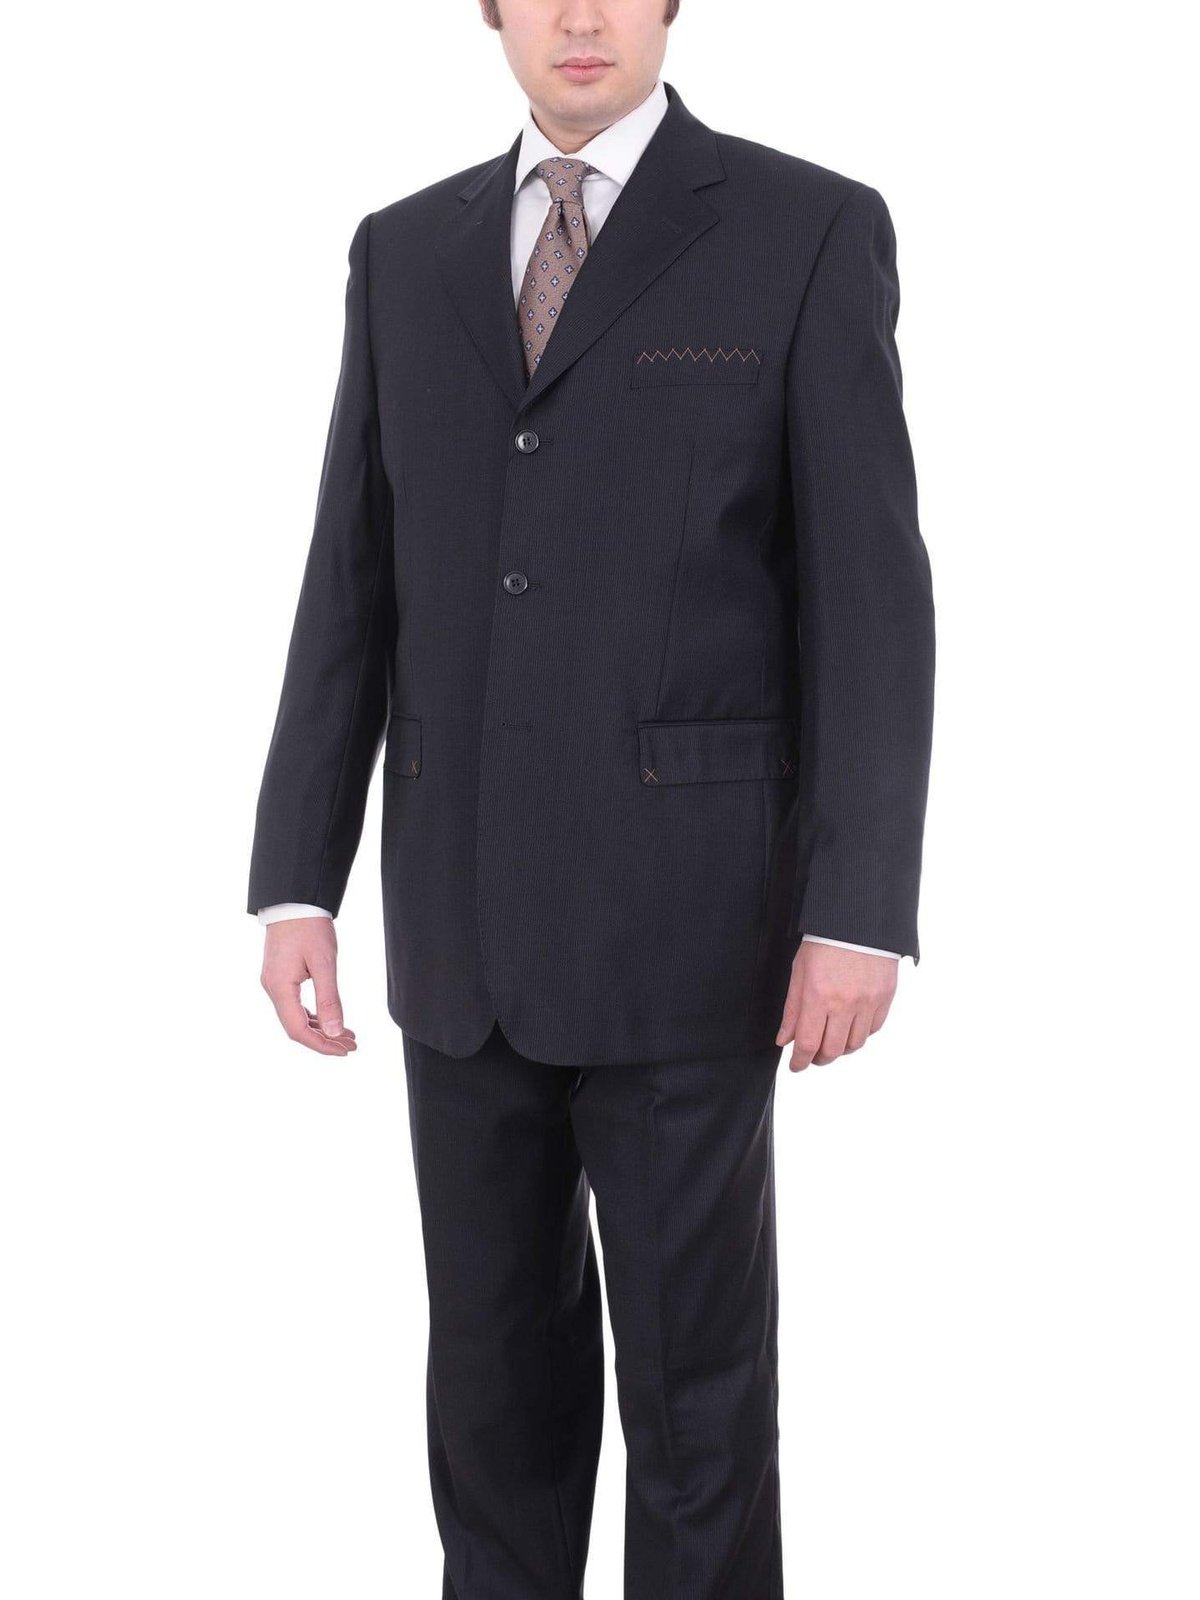 Carlo Palazzi Sale Suits 40R Mens Italy Classic Fit Navy Blue 3 Button Pleated 100% Wool Suit